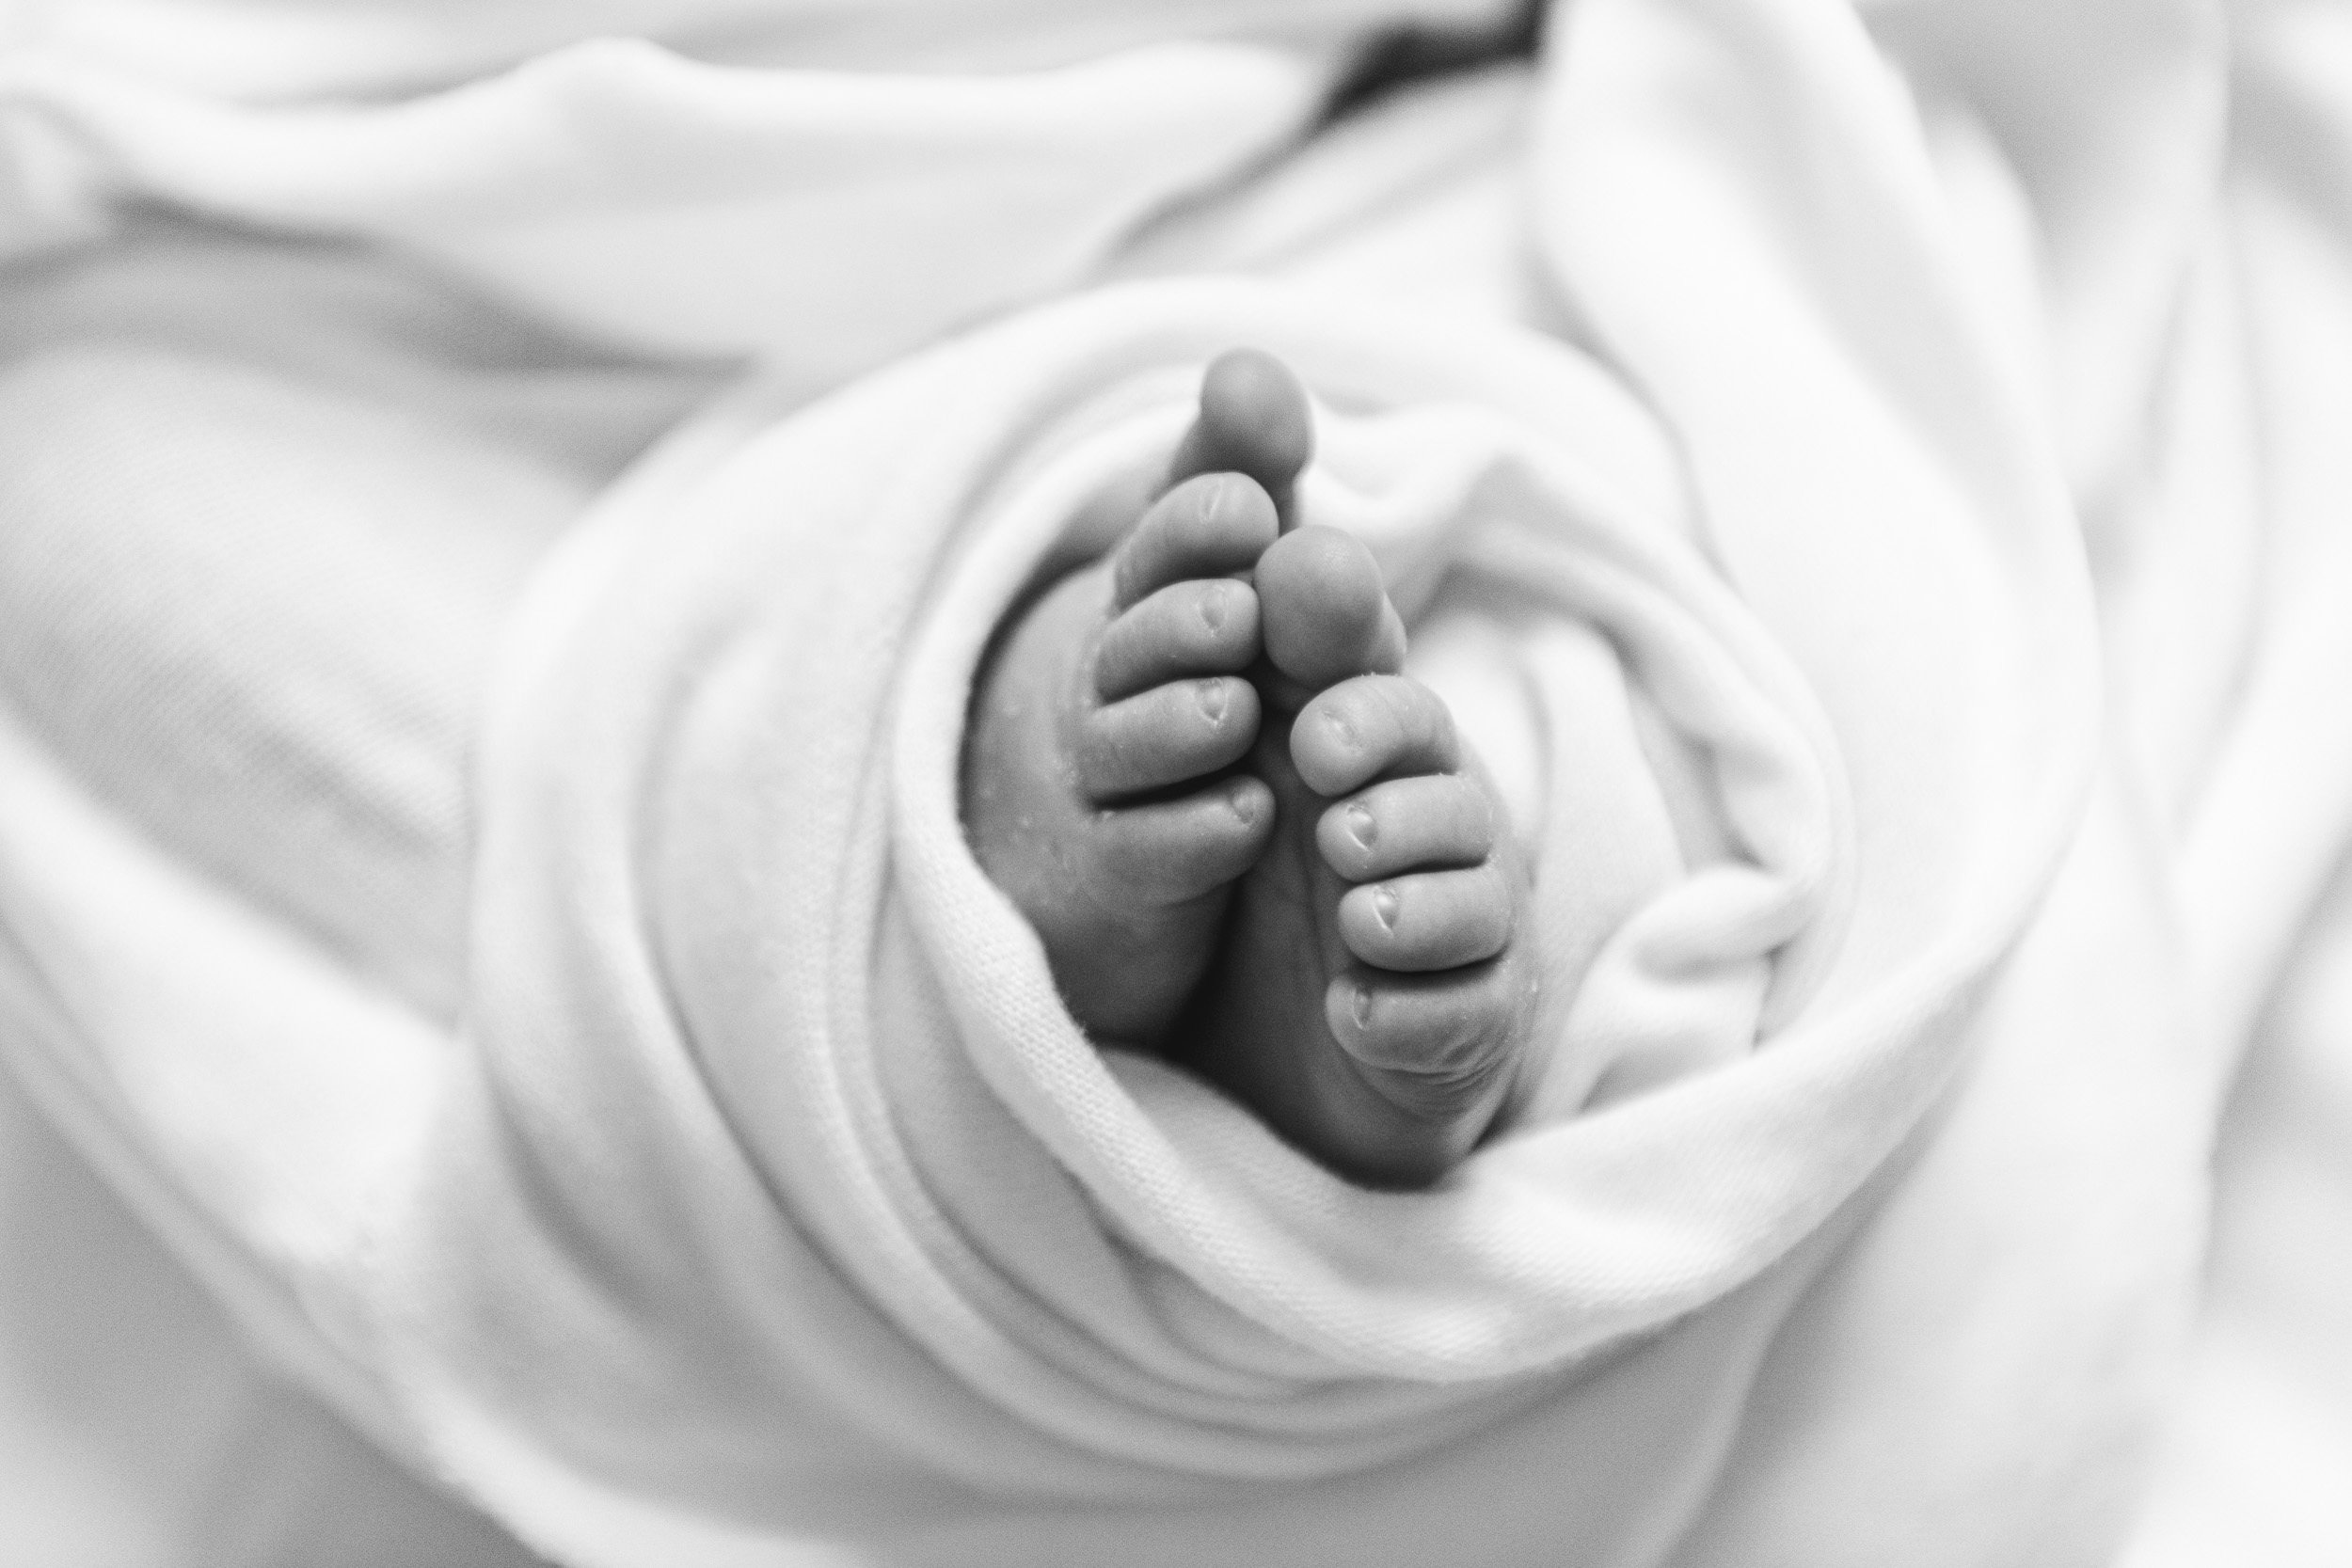  Wrapped up baby feet during an in-home newborn session with Nicole Hawkins Photography. baby feet detailed portrait black and white #NewbornSession #NJfamilyphotographer #Inhomebabyphotography #newborn #NicoleHawkinsPhotography #NicoleHawkinsNewborn